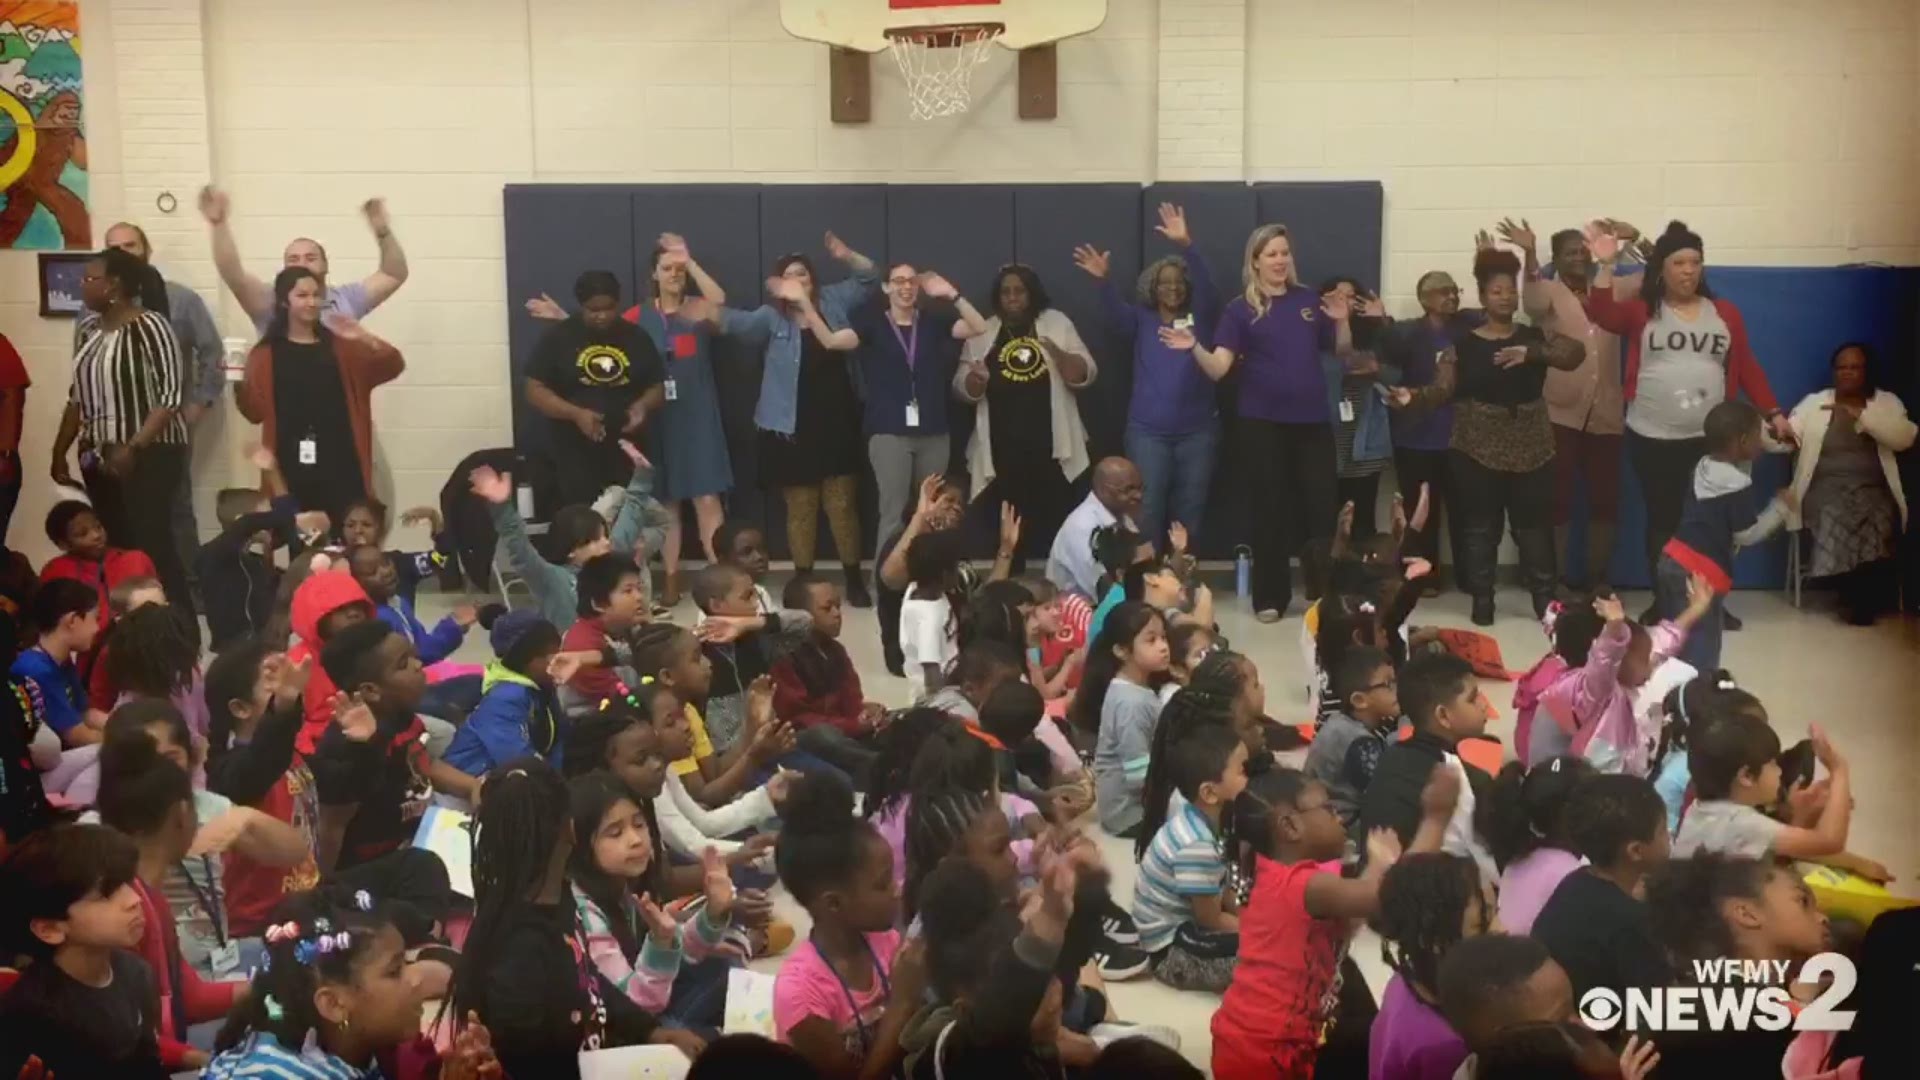 The Good Morning Show's Read 2 Succeed crews stops at Fairview Elementary.